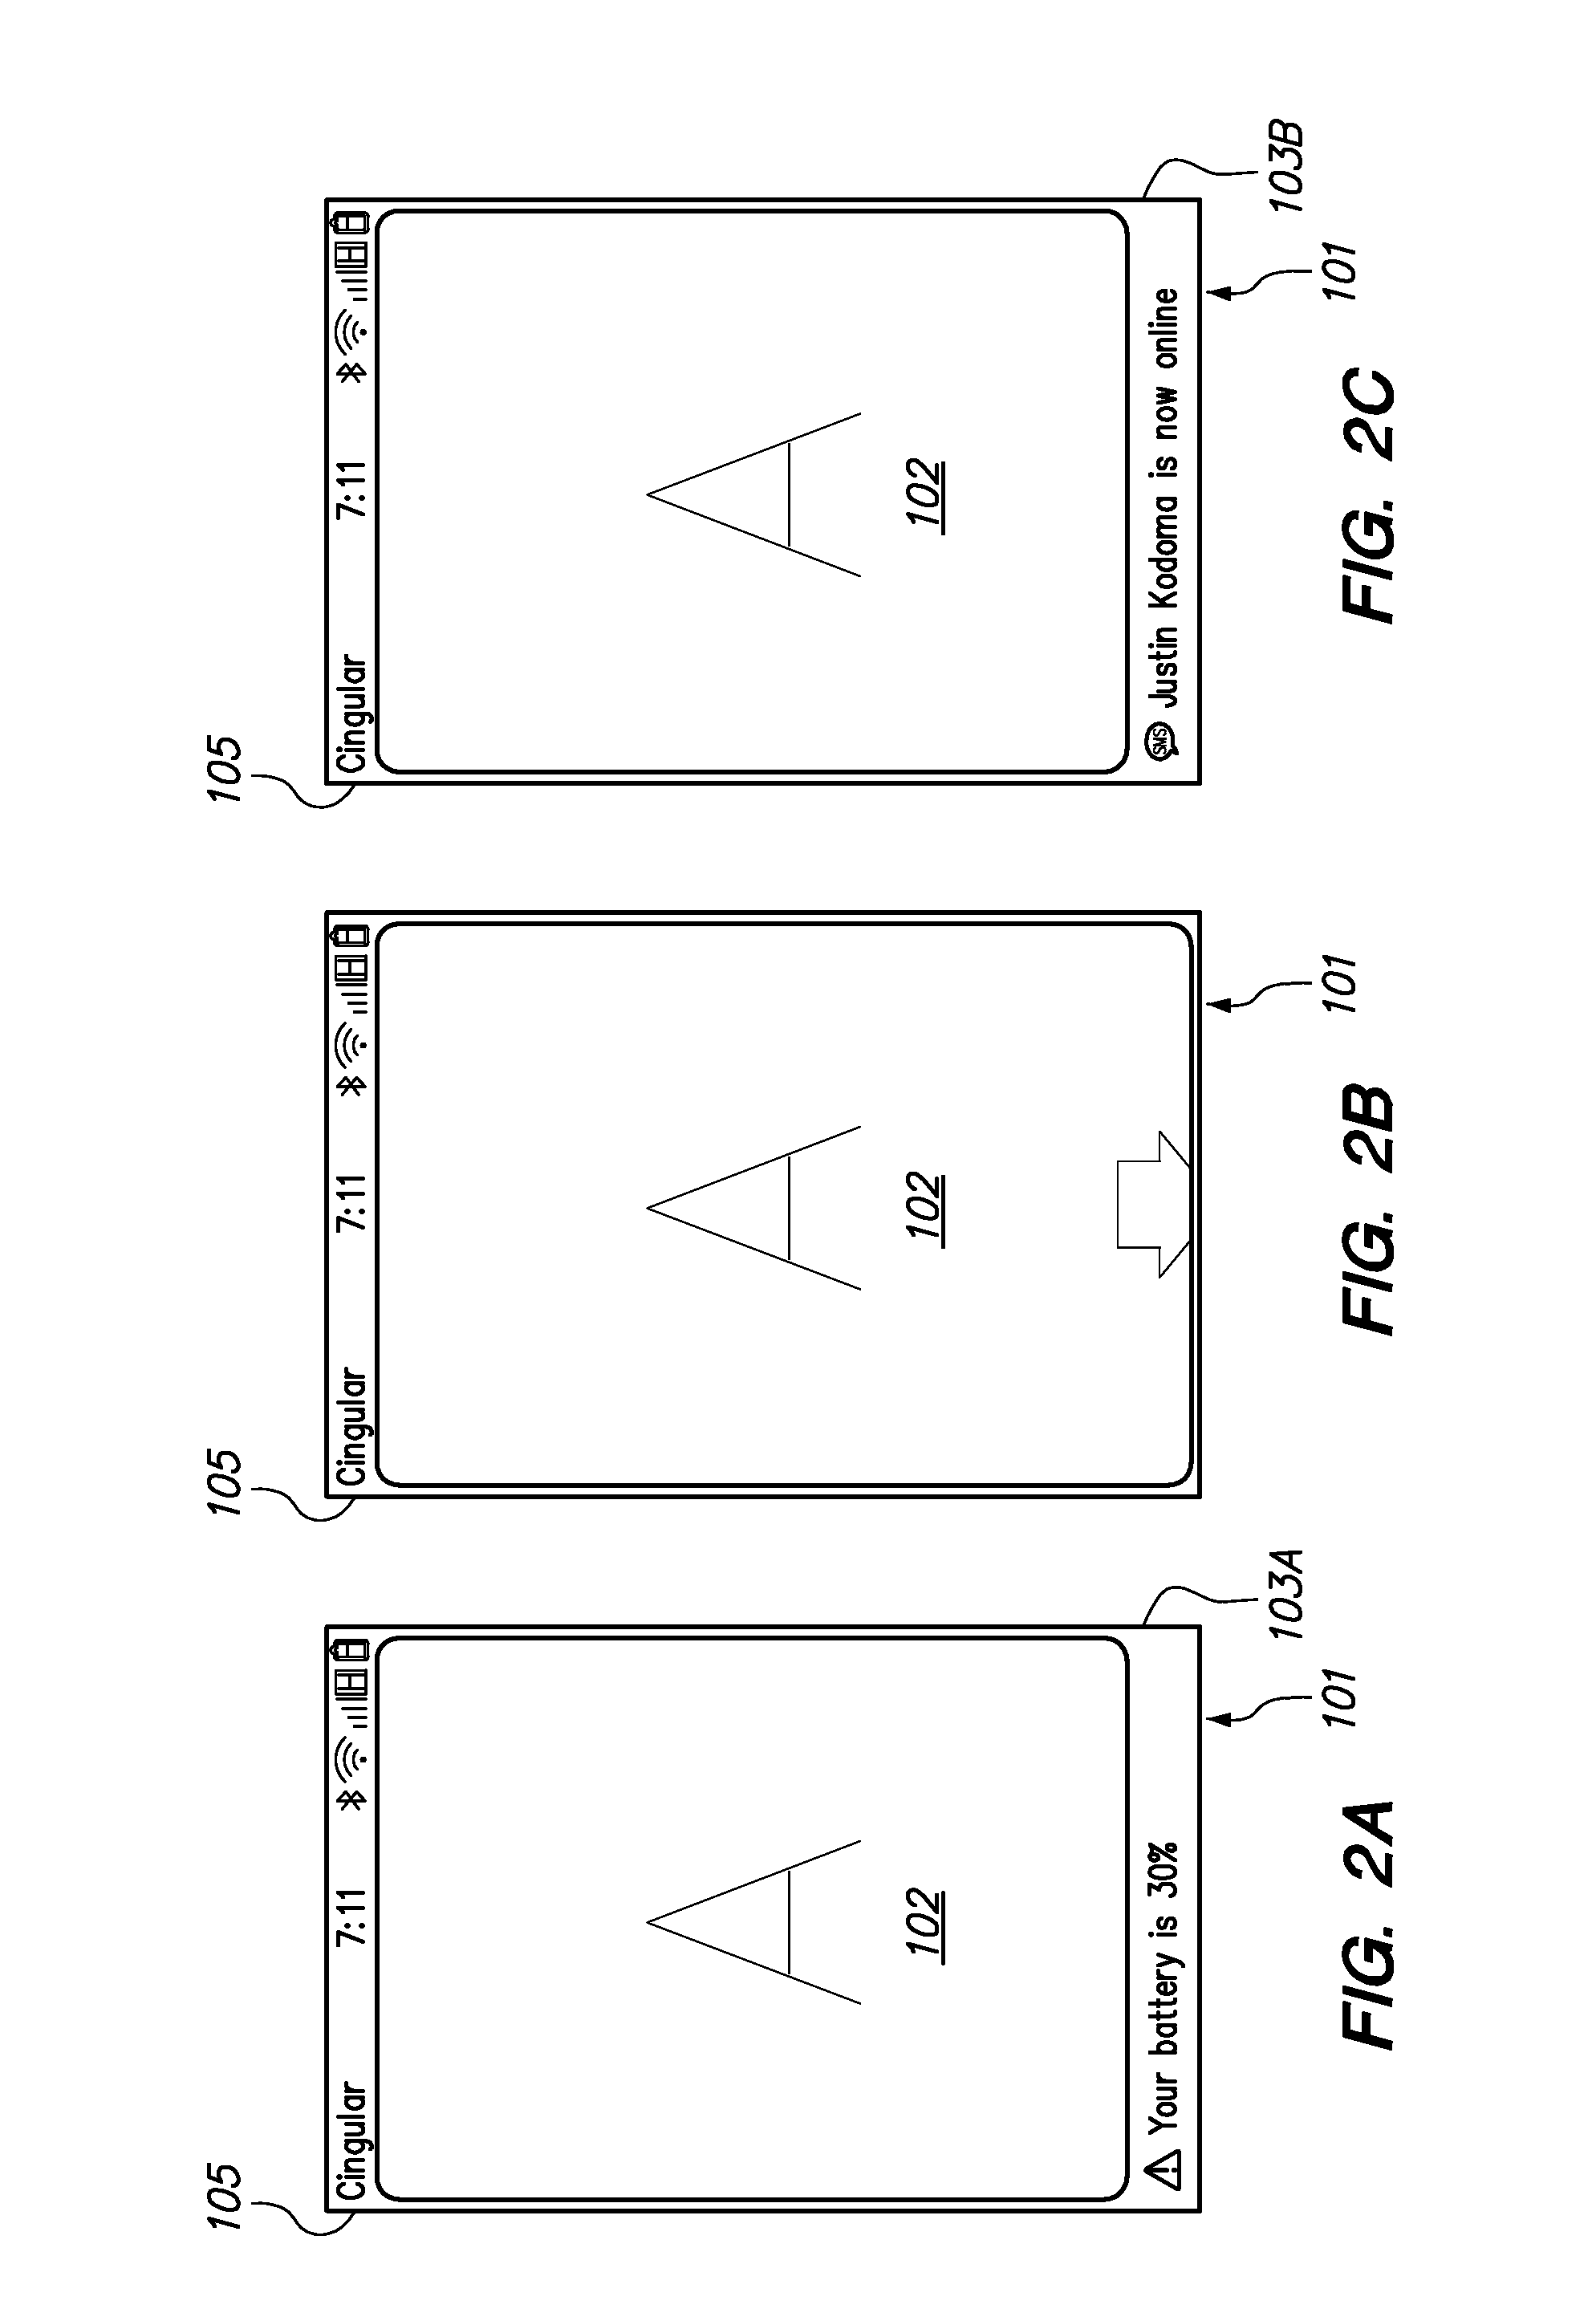 Notifying A User Of Events In A Computing Device